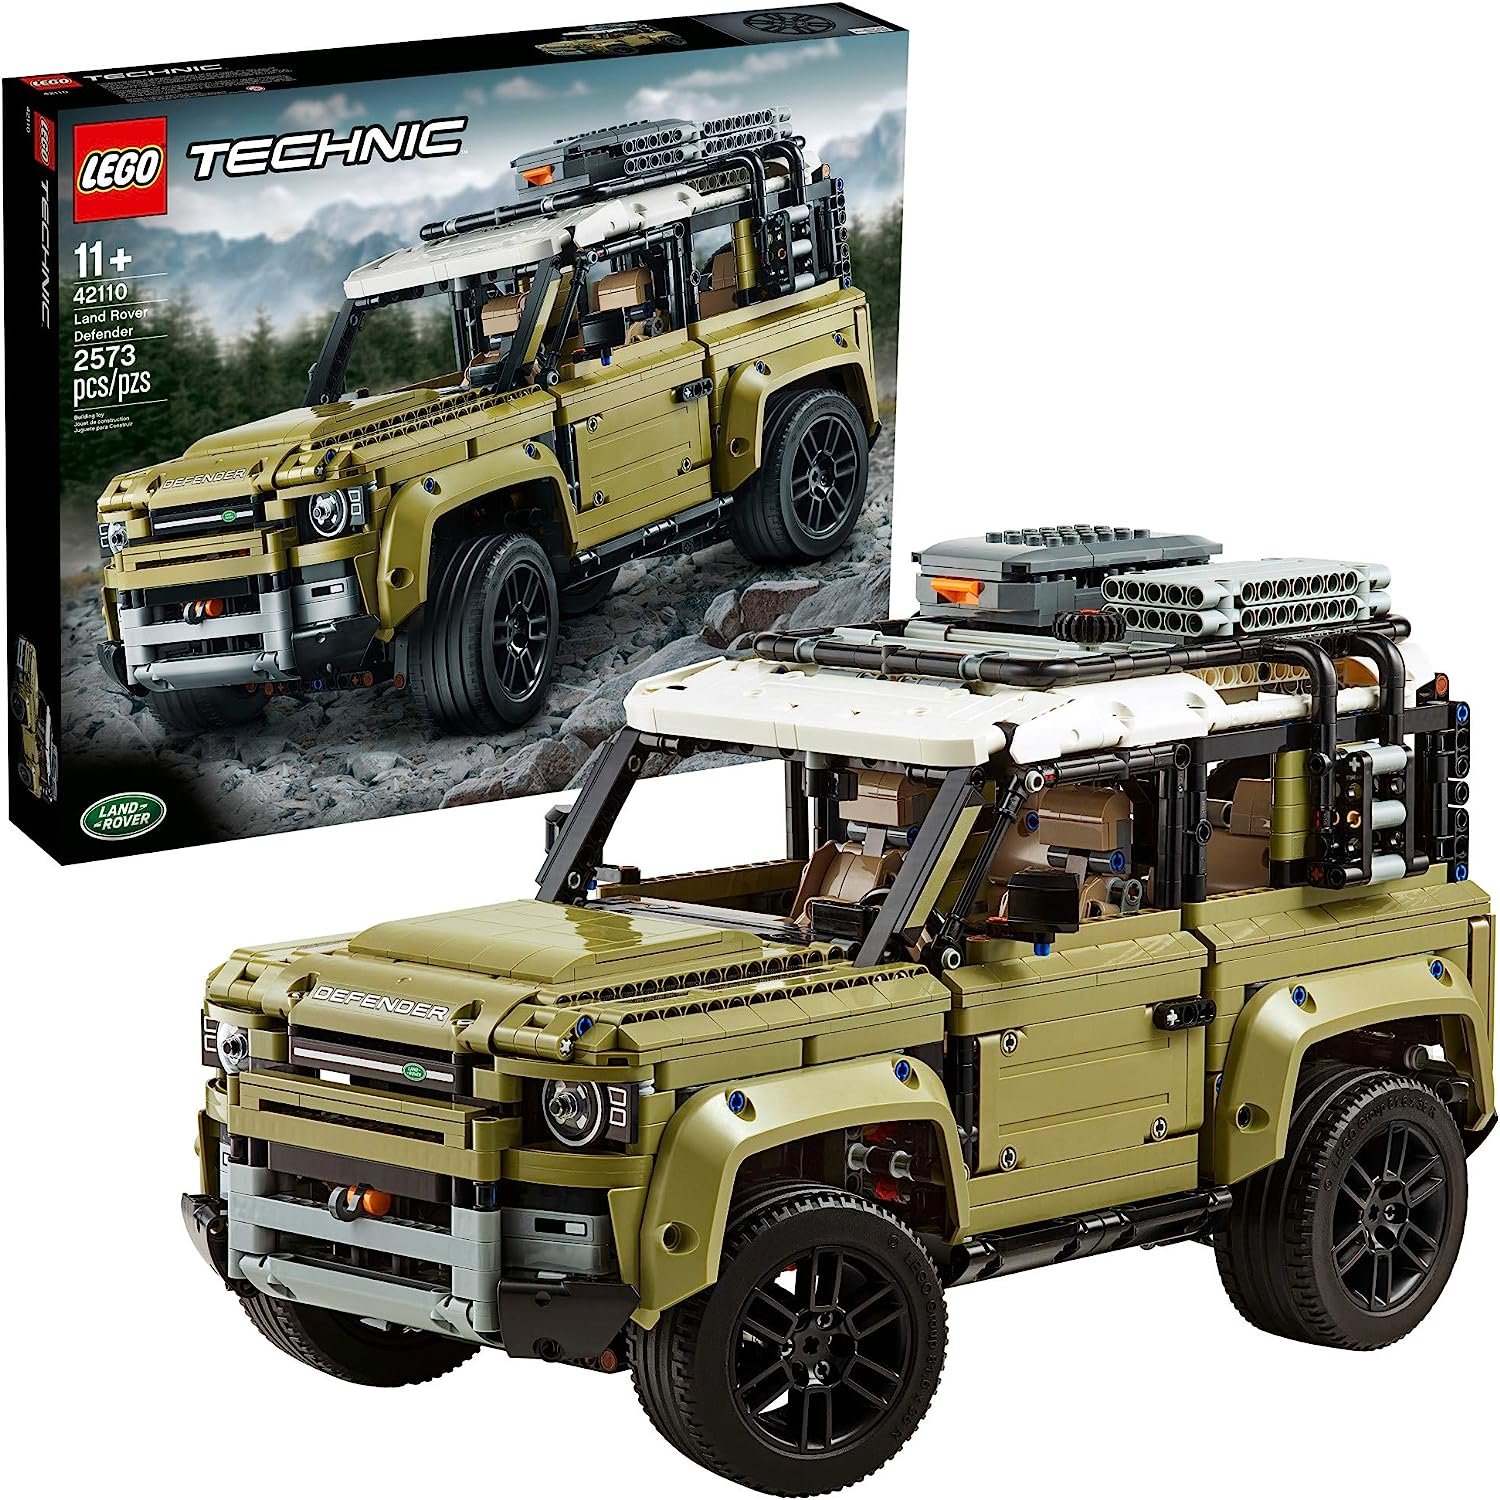 New Land Rover Defender Ends Up On A Tow Truck In Lego Form